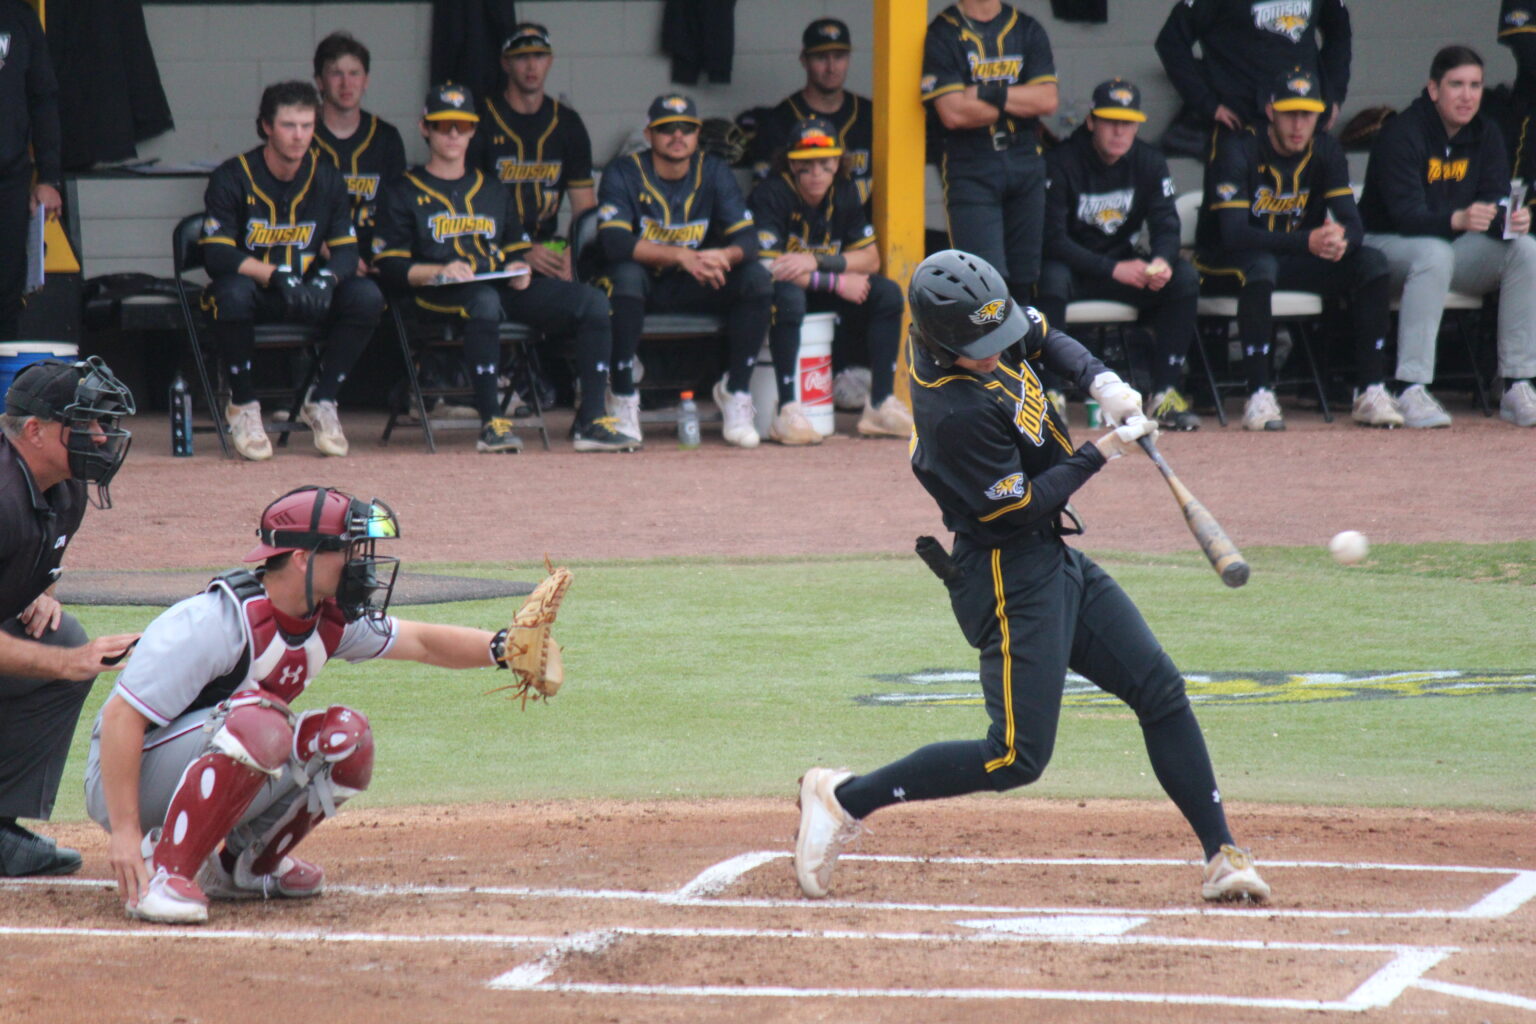 Last place Towson Baseball takes down first place Elon in first game of